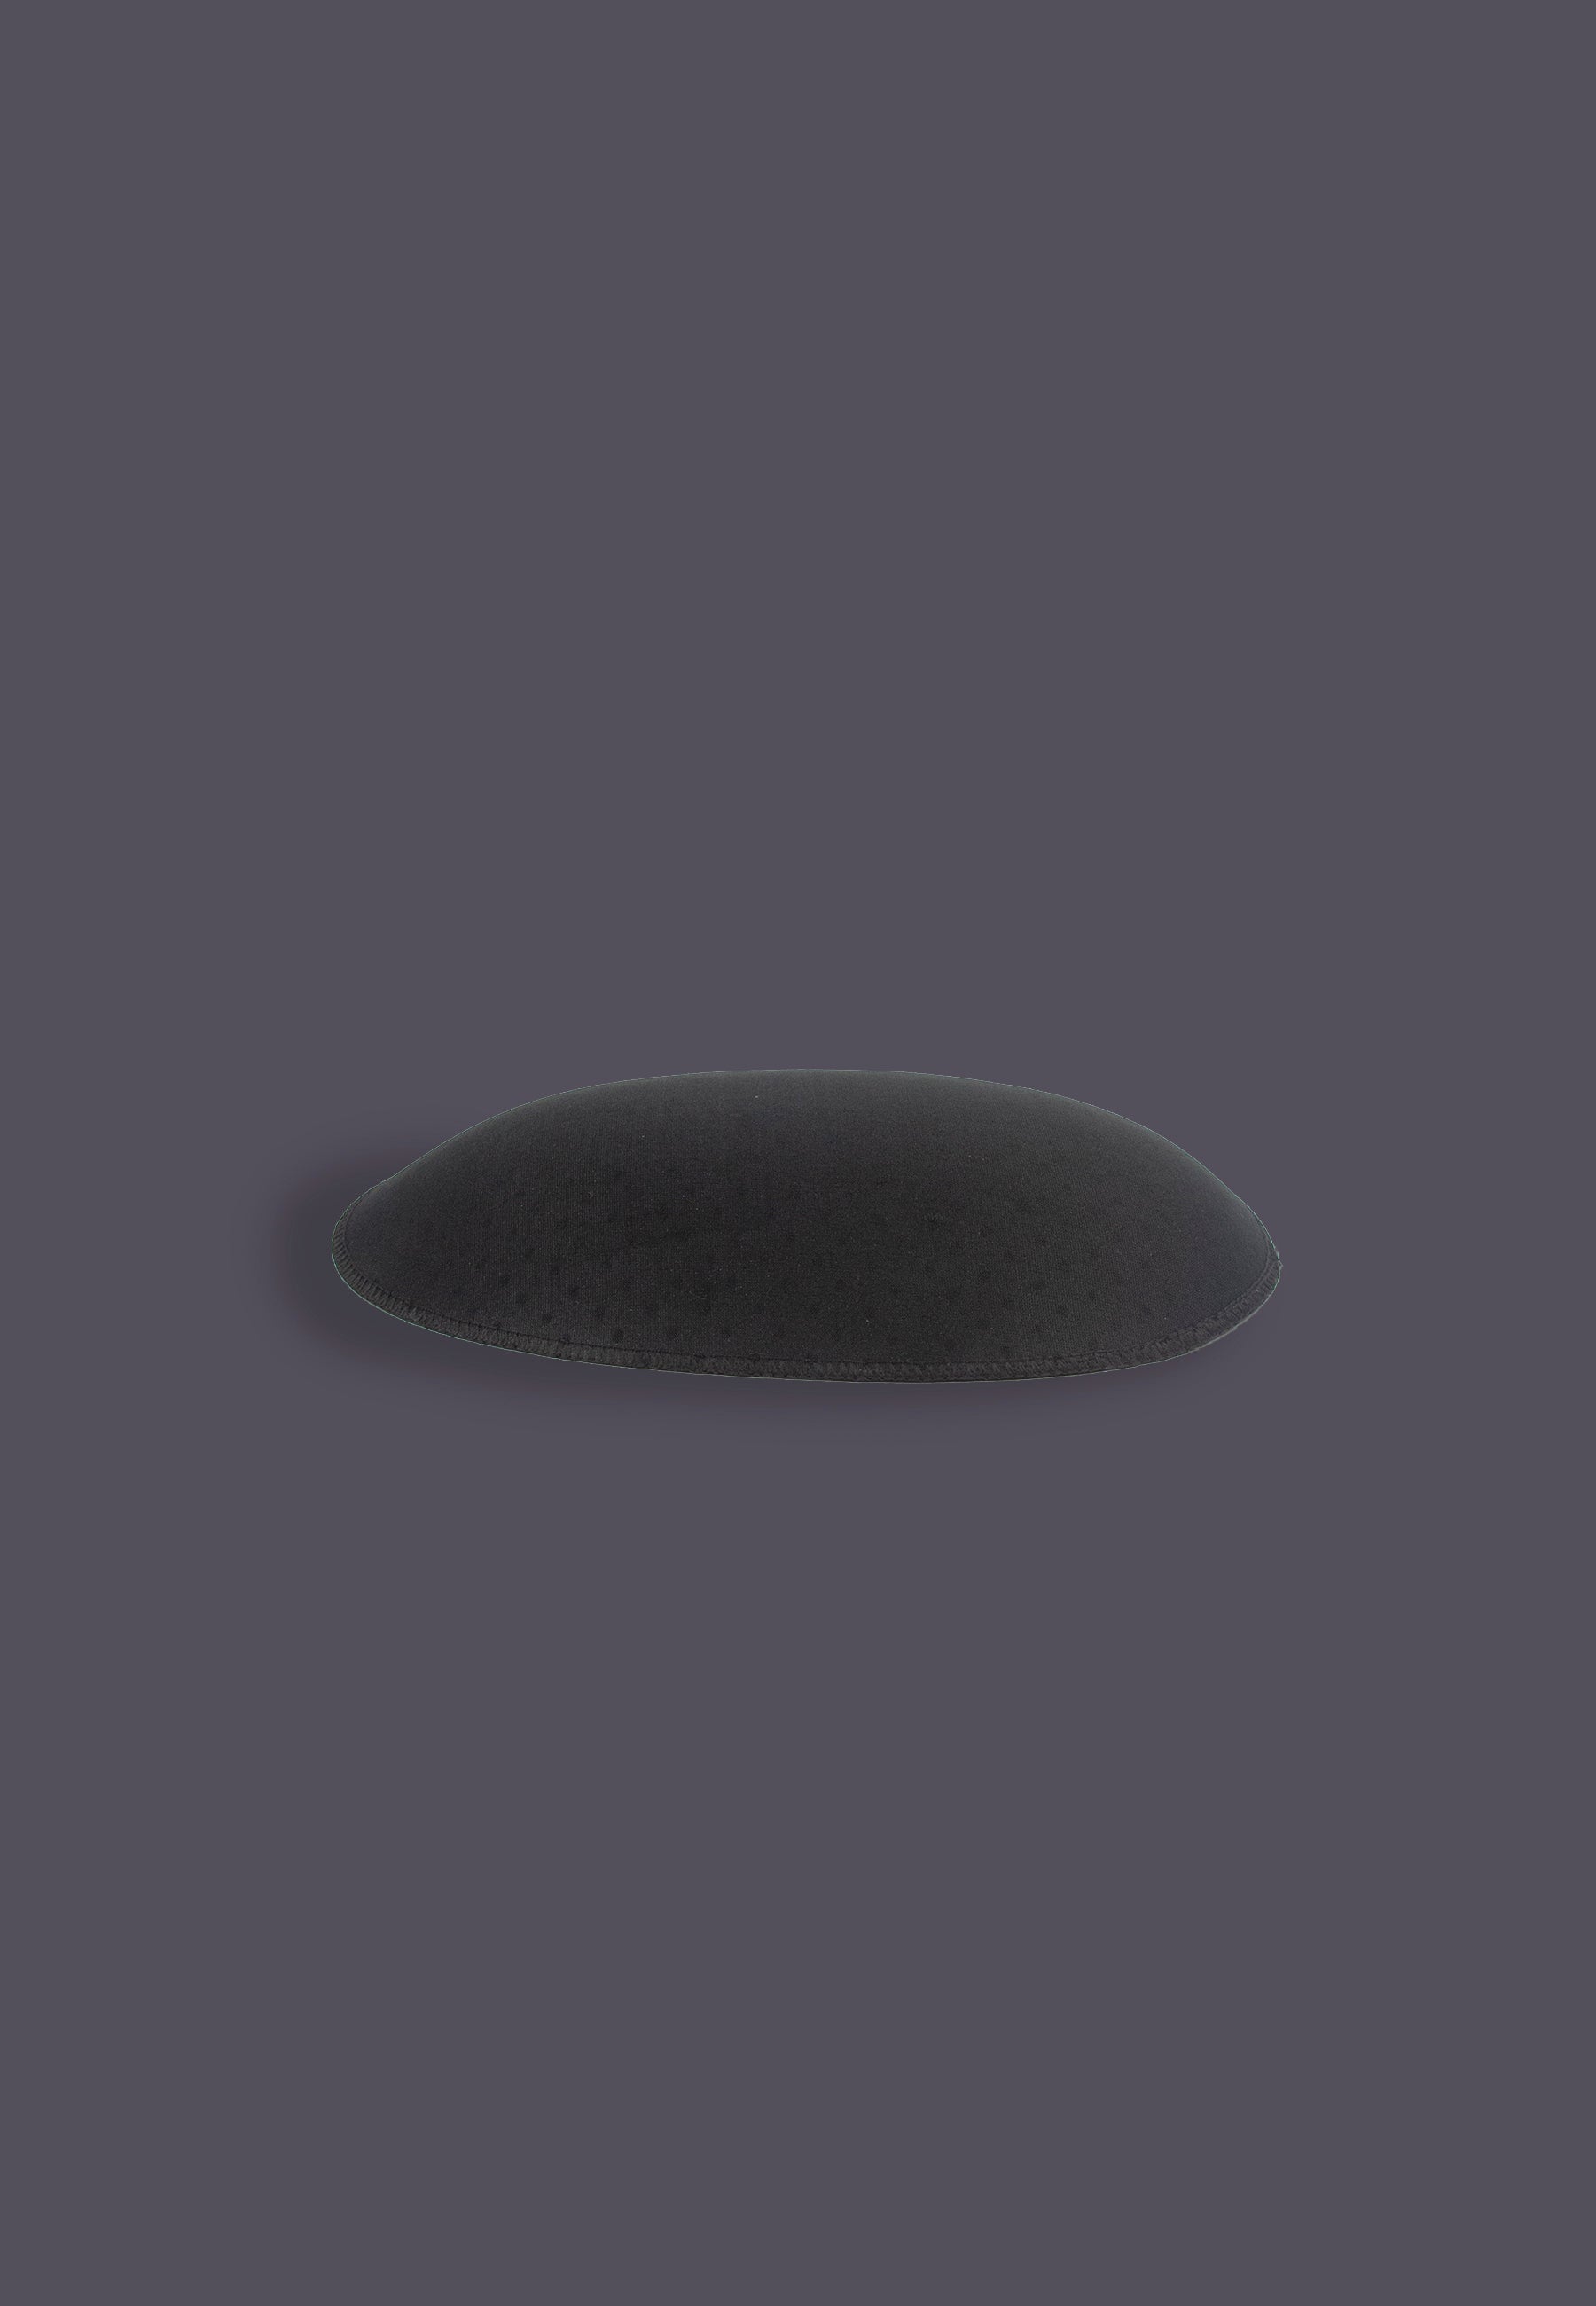 Foam Self-Adhesive Hippads black showing the curve and padding